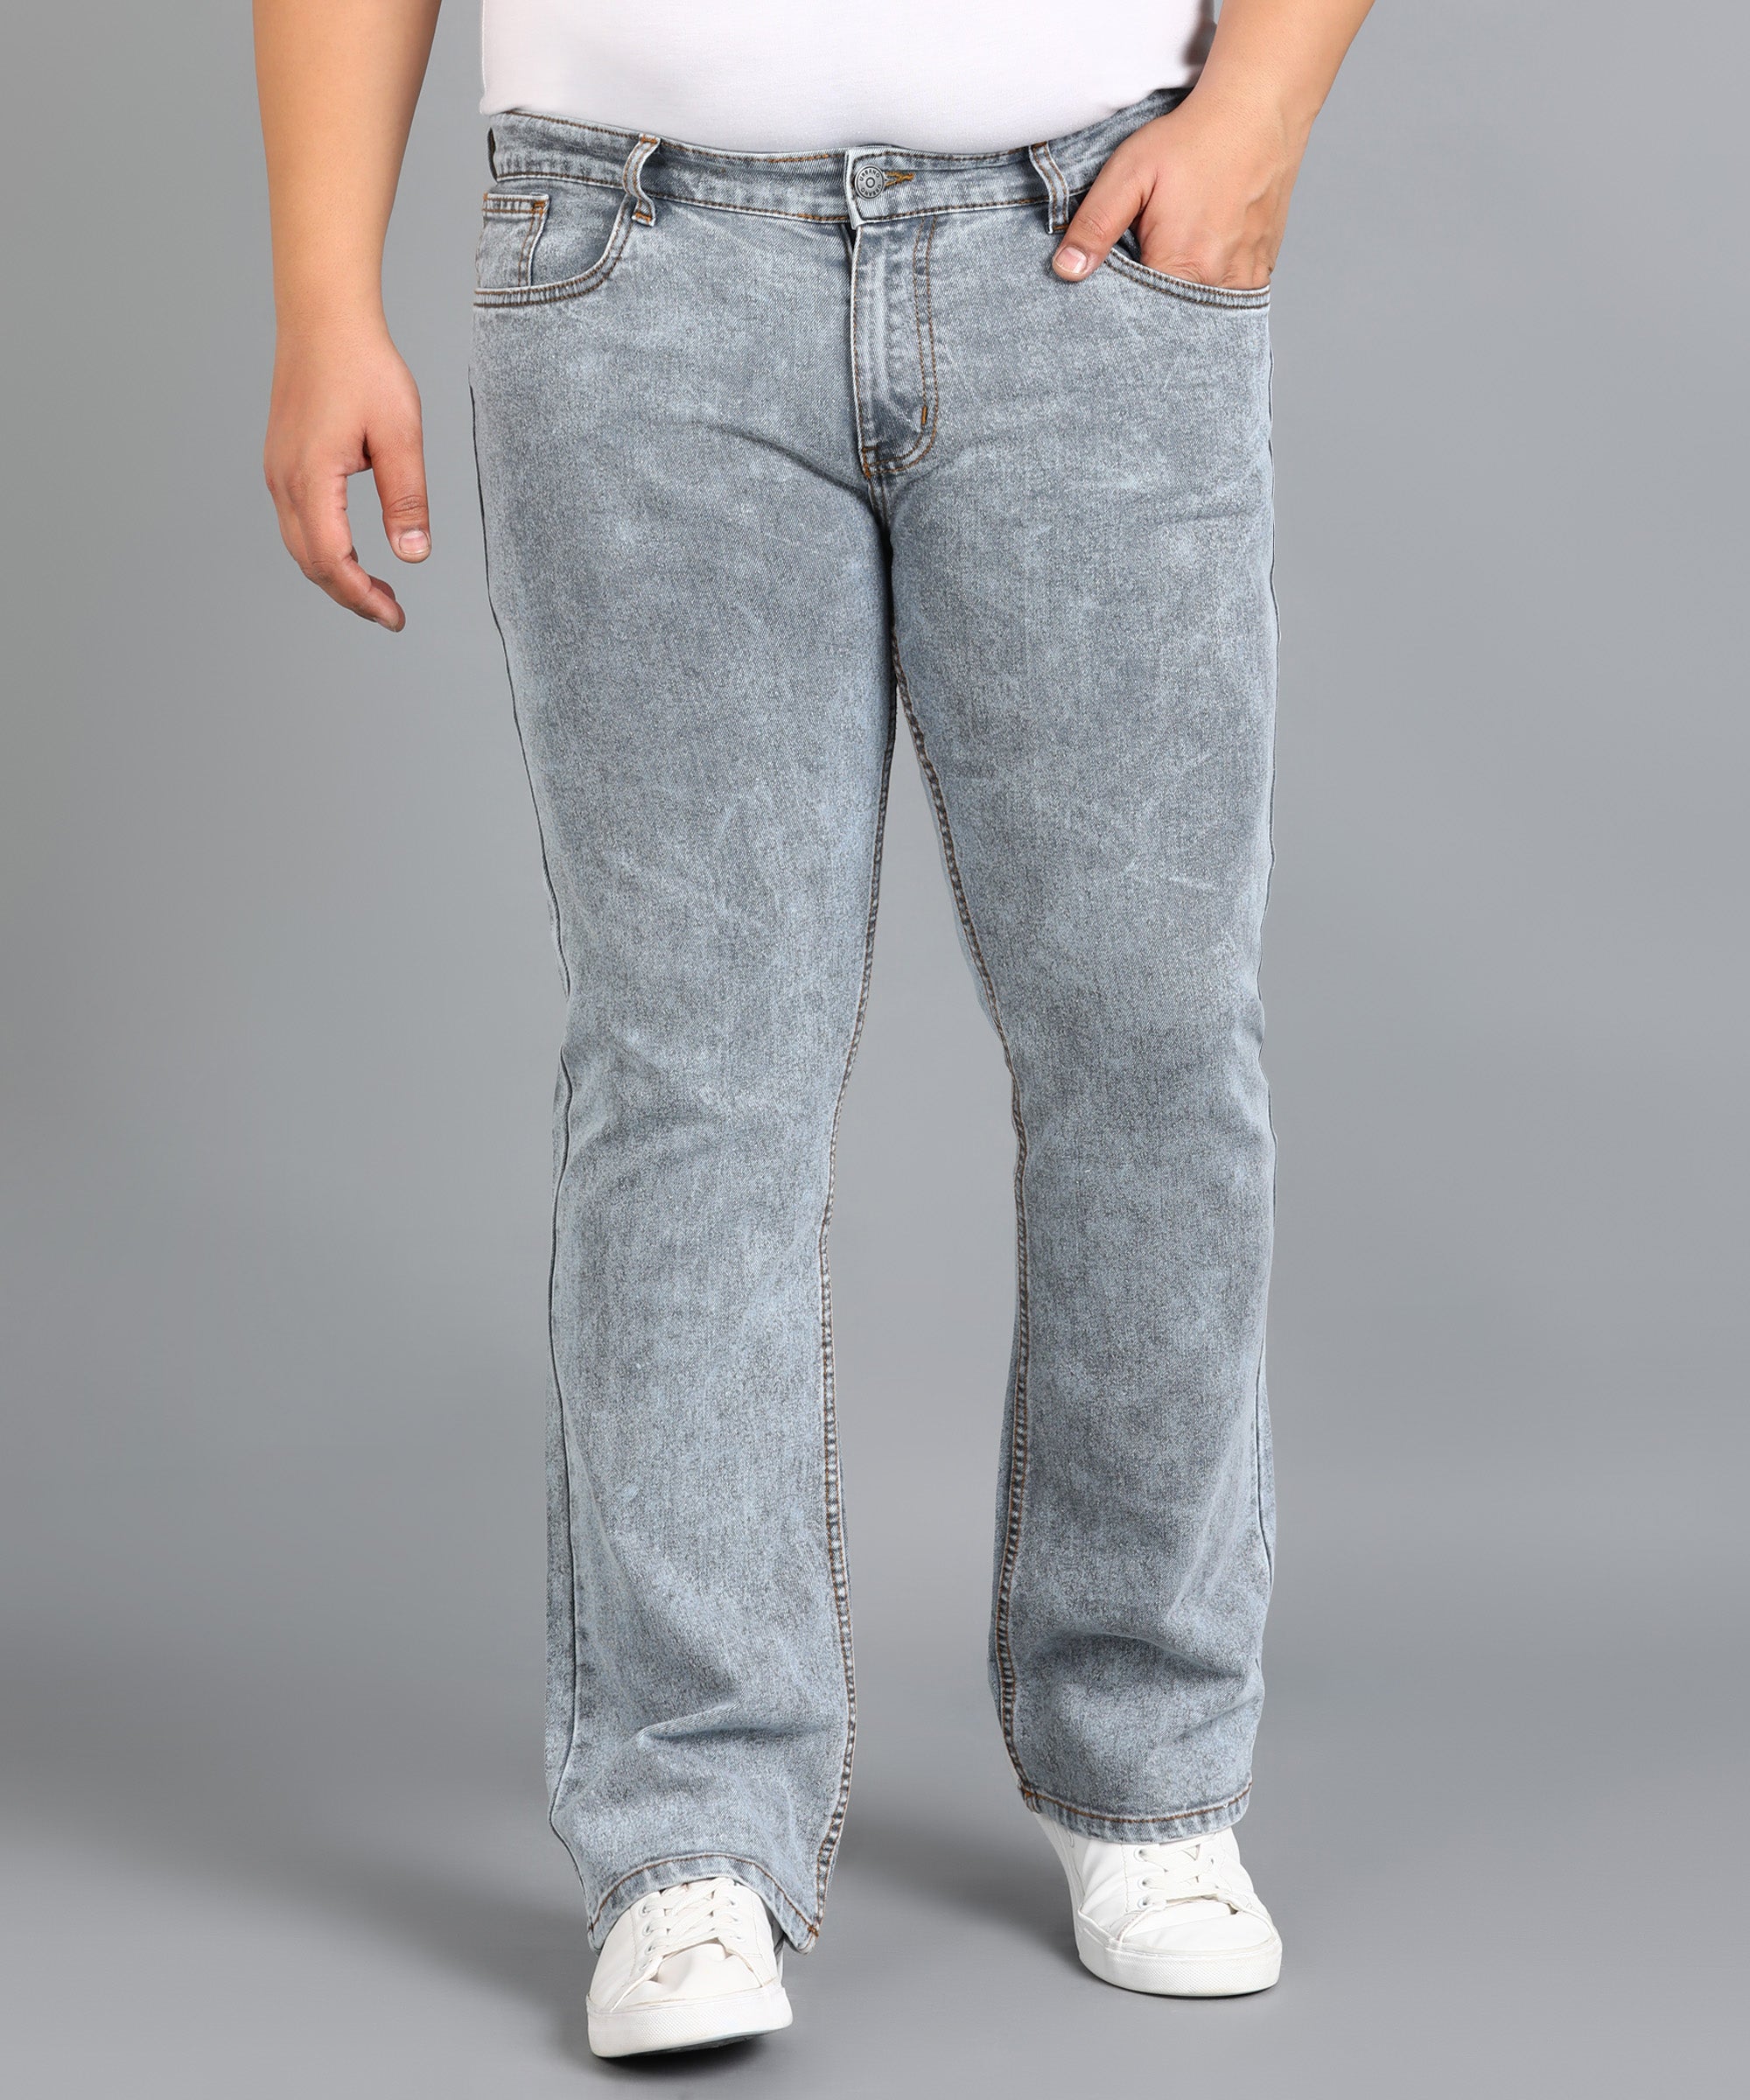 Plus Men's Light Grey Washed Bootcut Jeans Stretchable